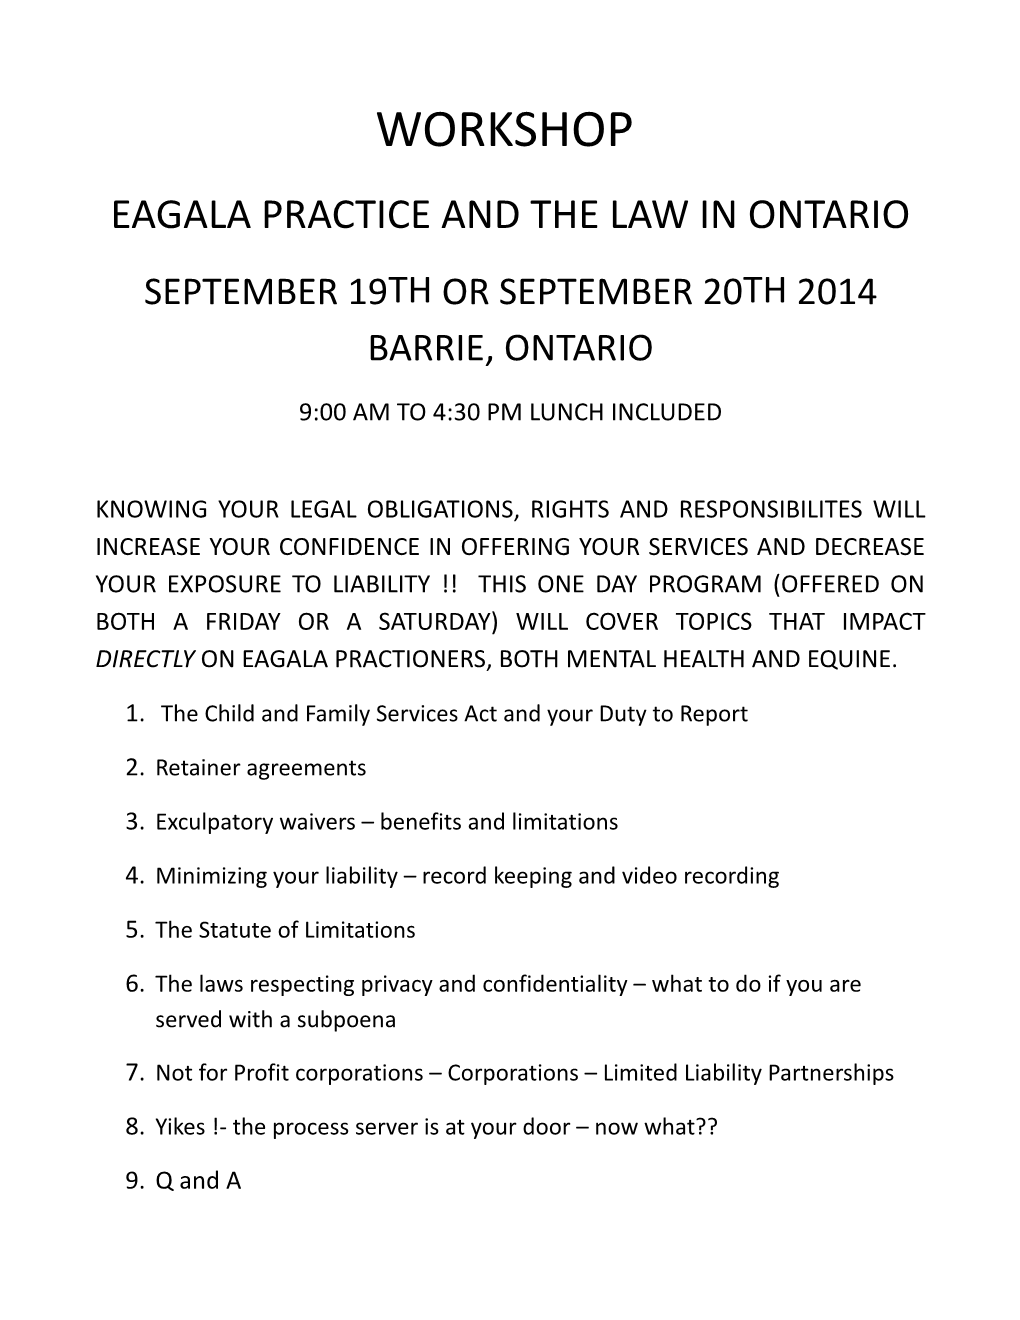 Eagala Practice and the Law in Ontario